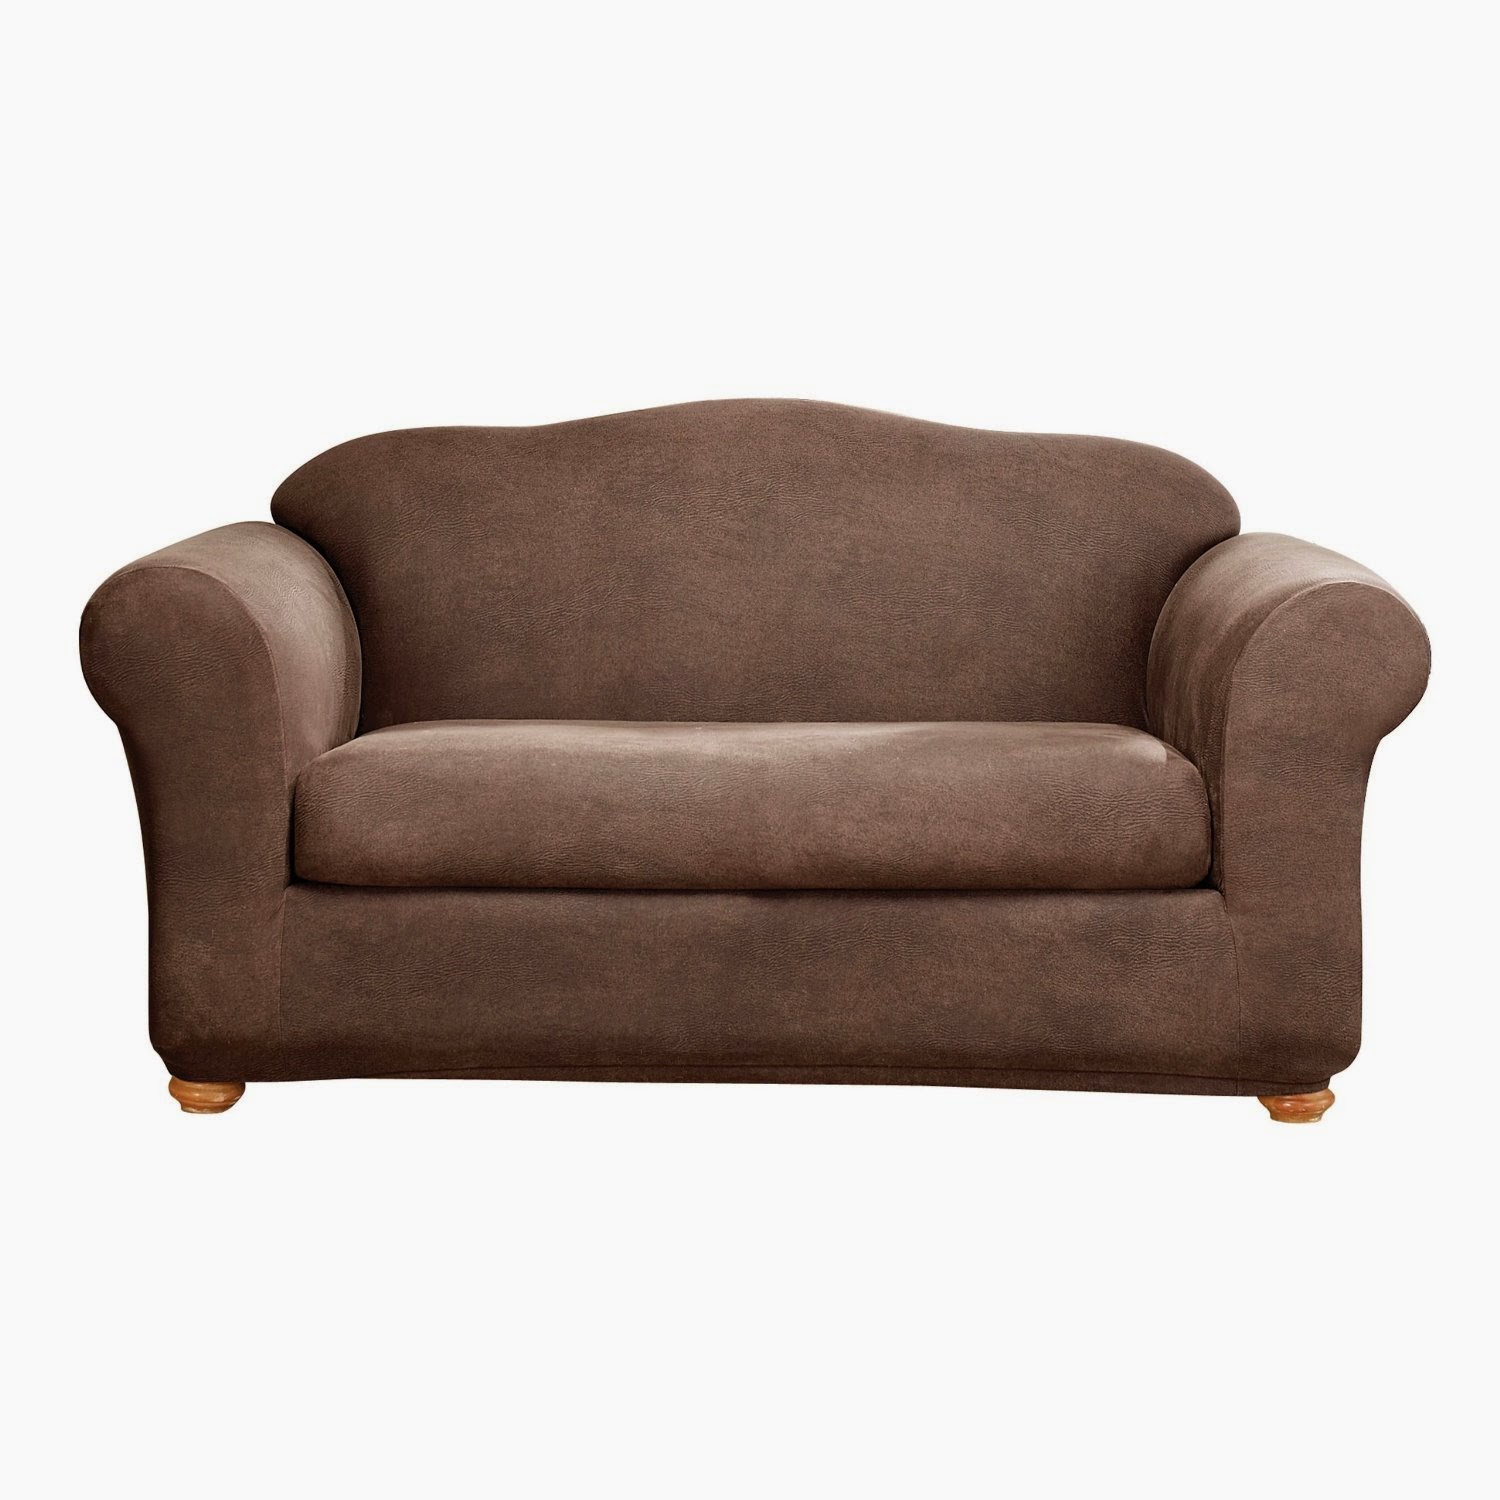 couch covers: leather couch covers